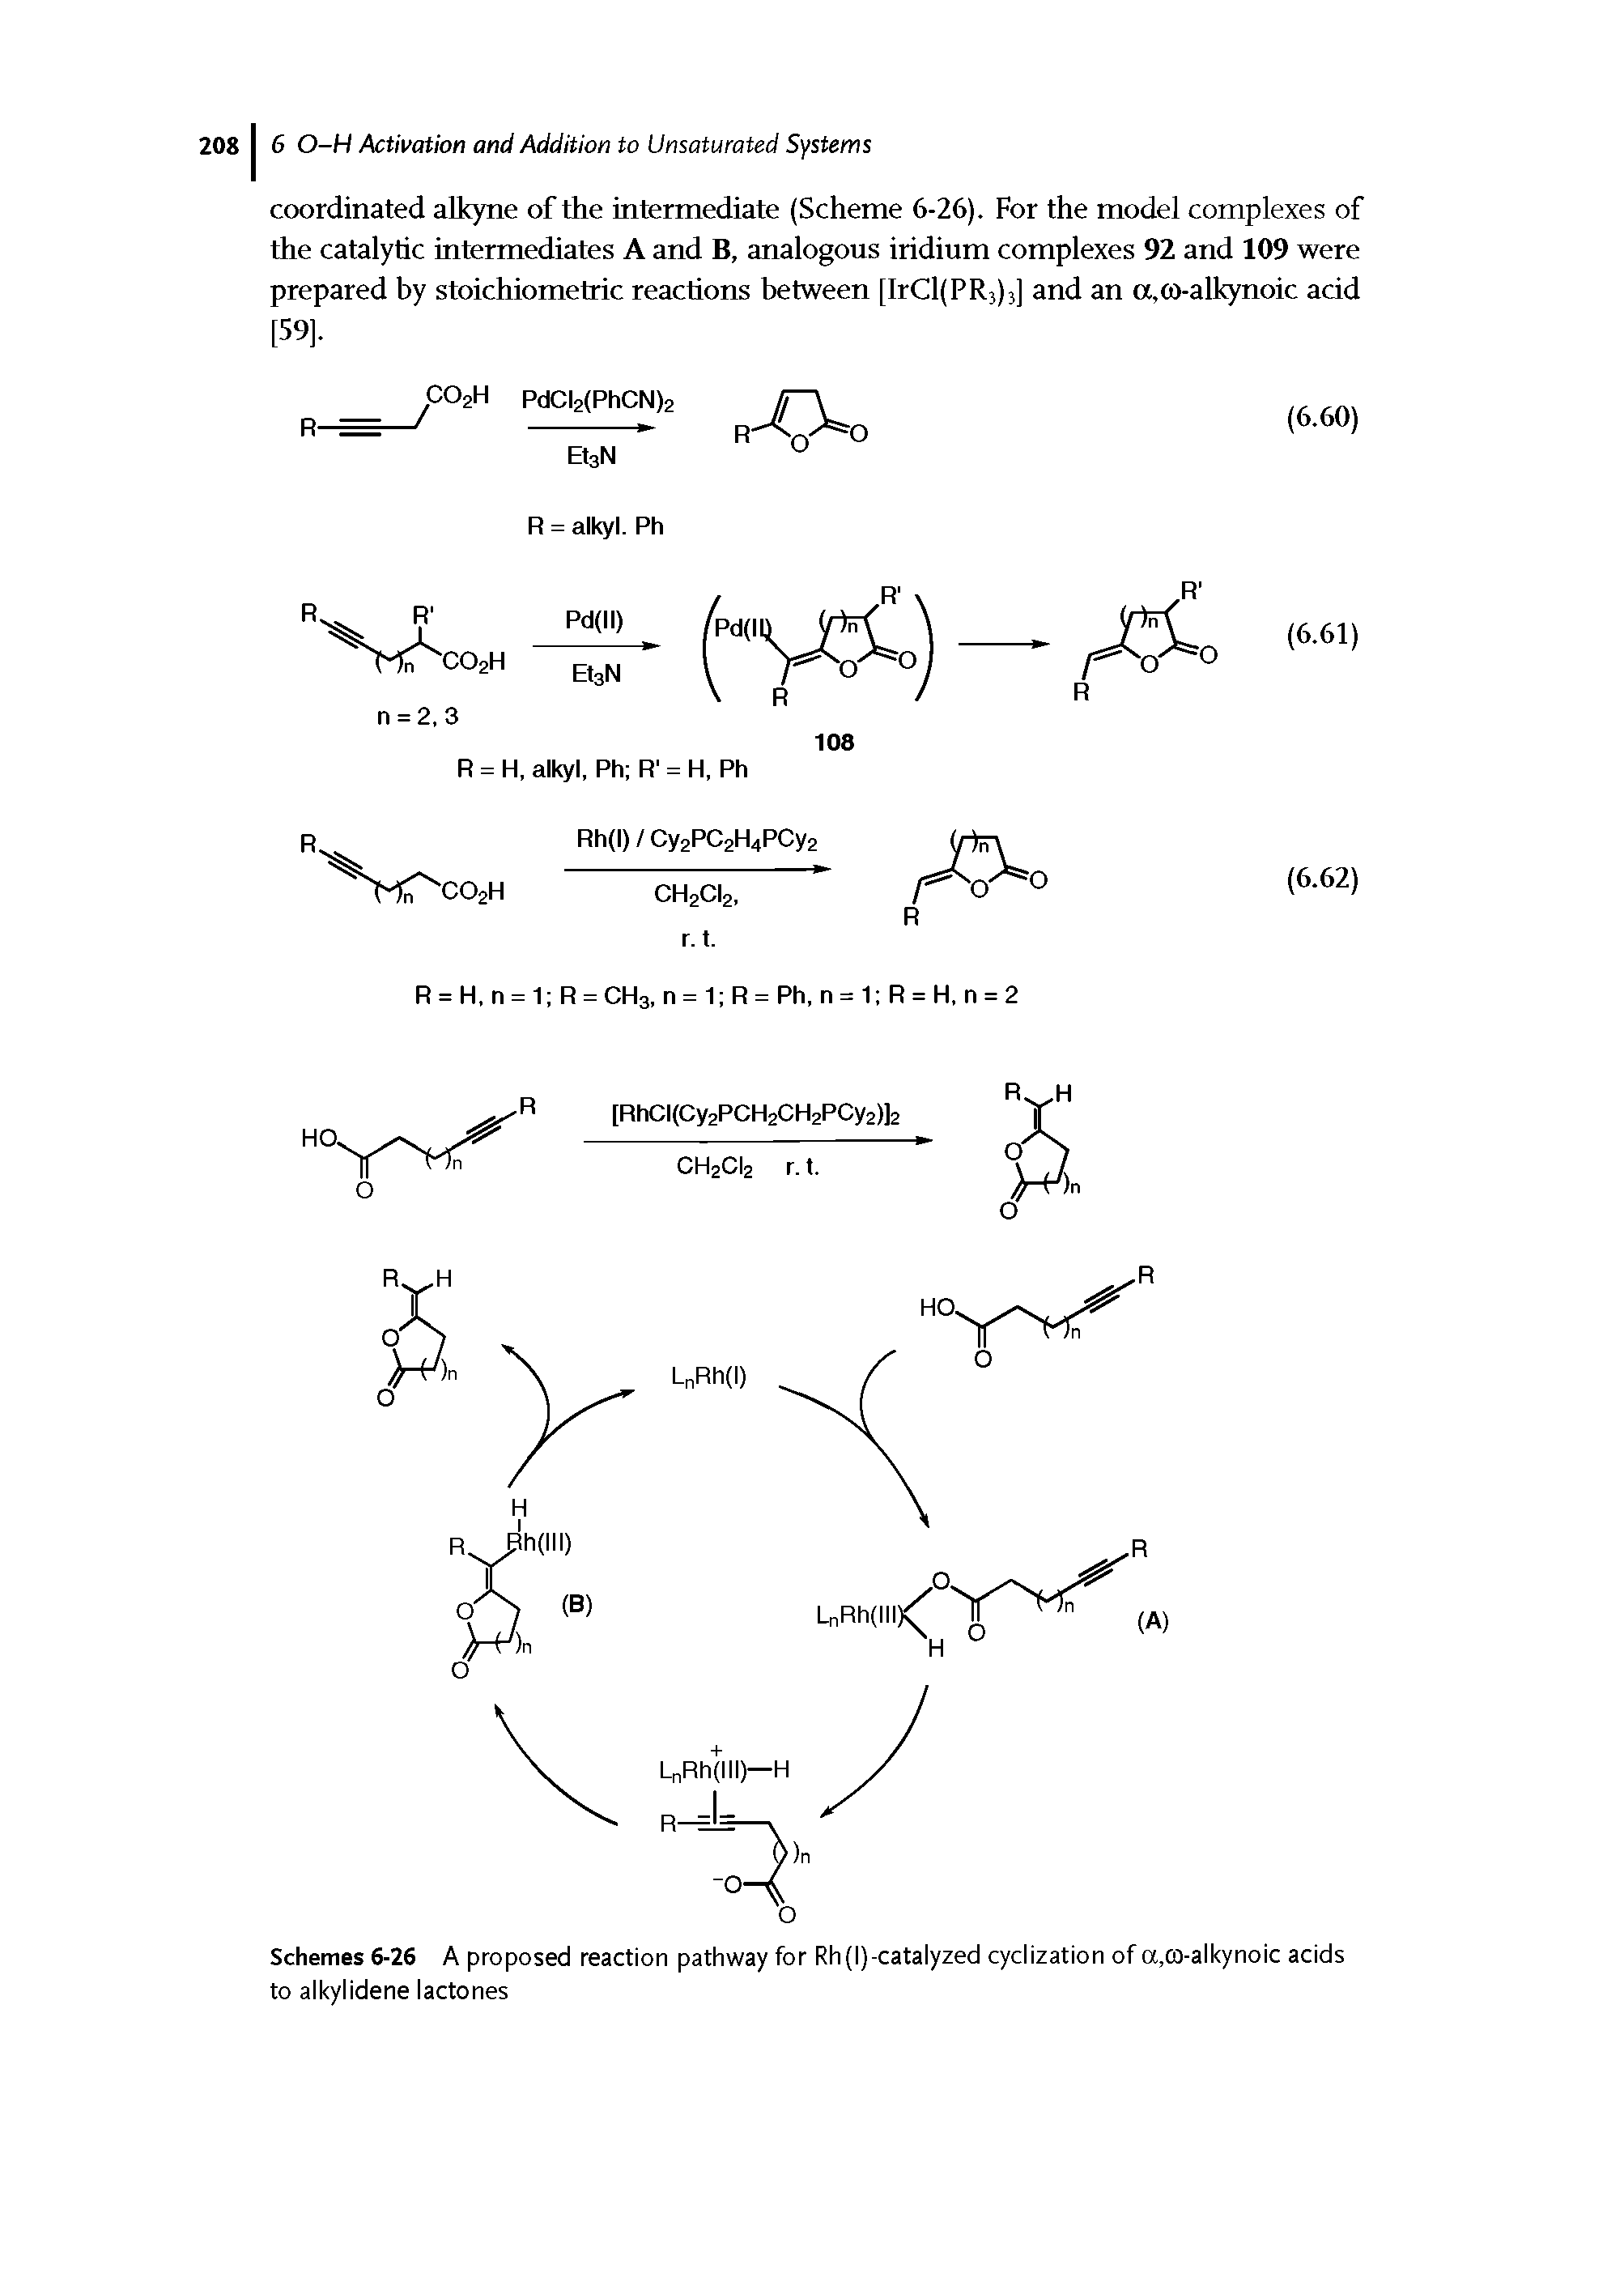 Schemes 6-26 A proposed reaction pathway for Rh(l)-catalyzed cyclization of a,co-alkynoic acids to alkylidene lactones...